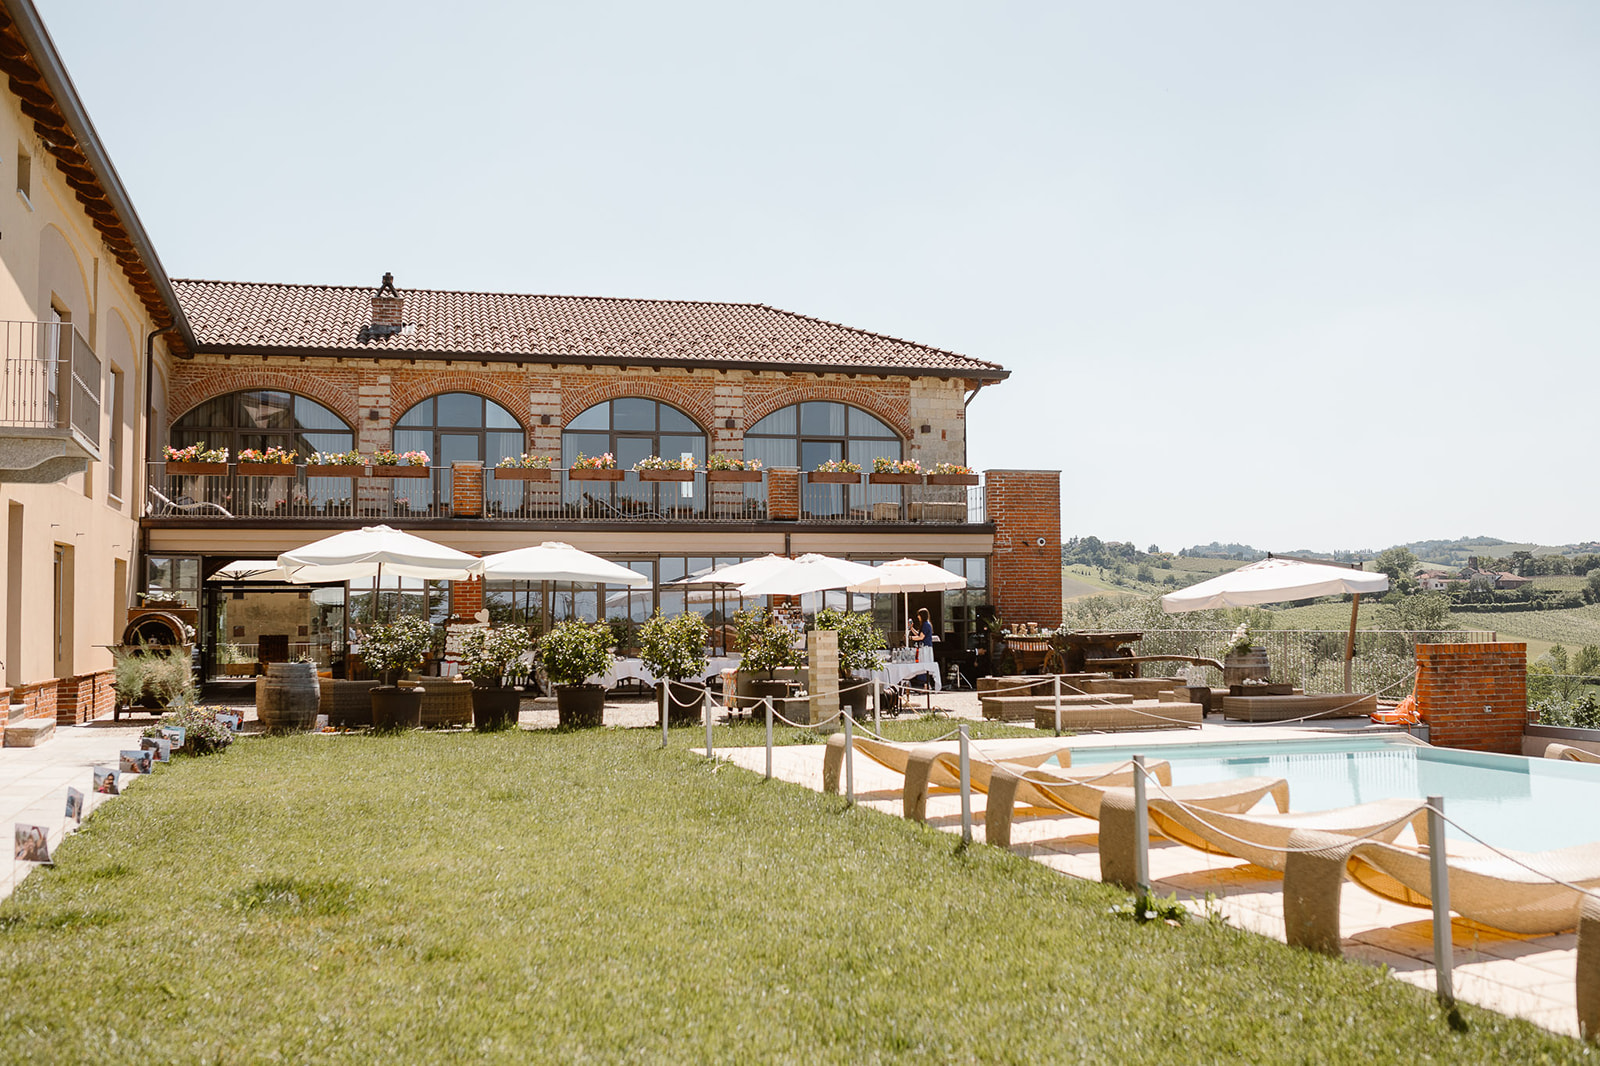 Cascina Faletta pool during a wedding day